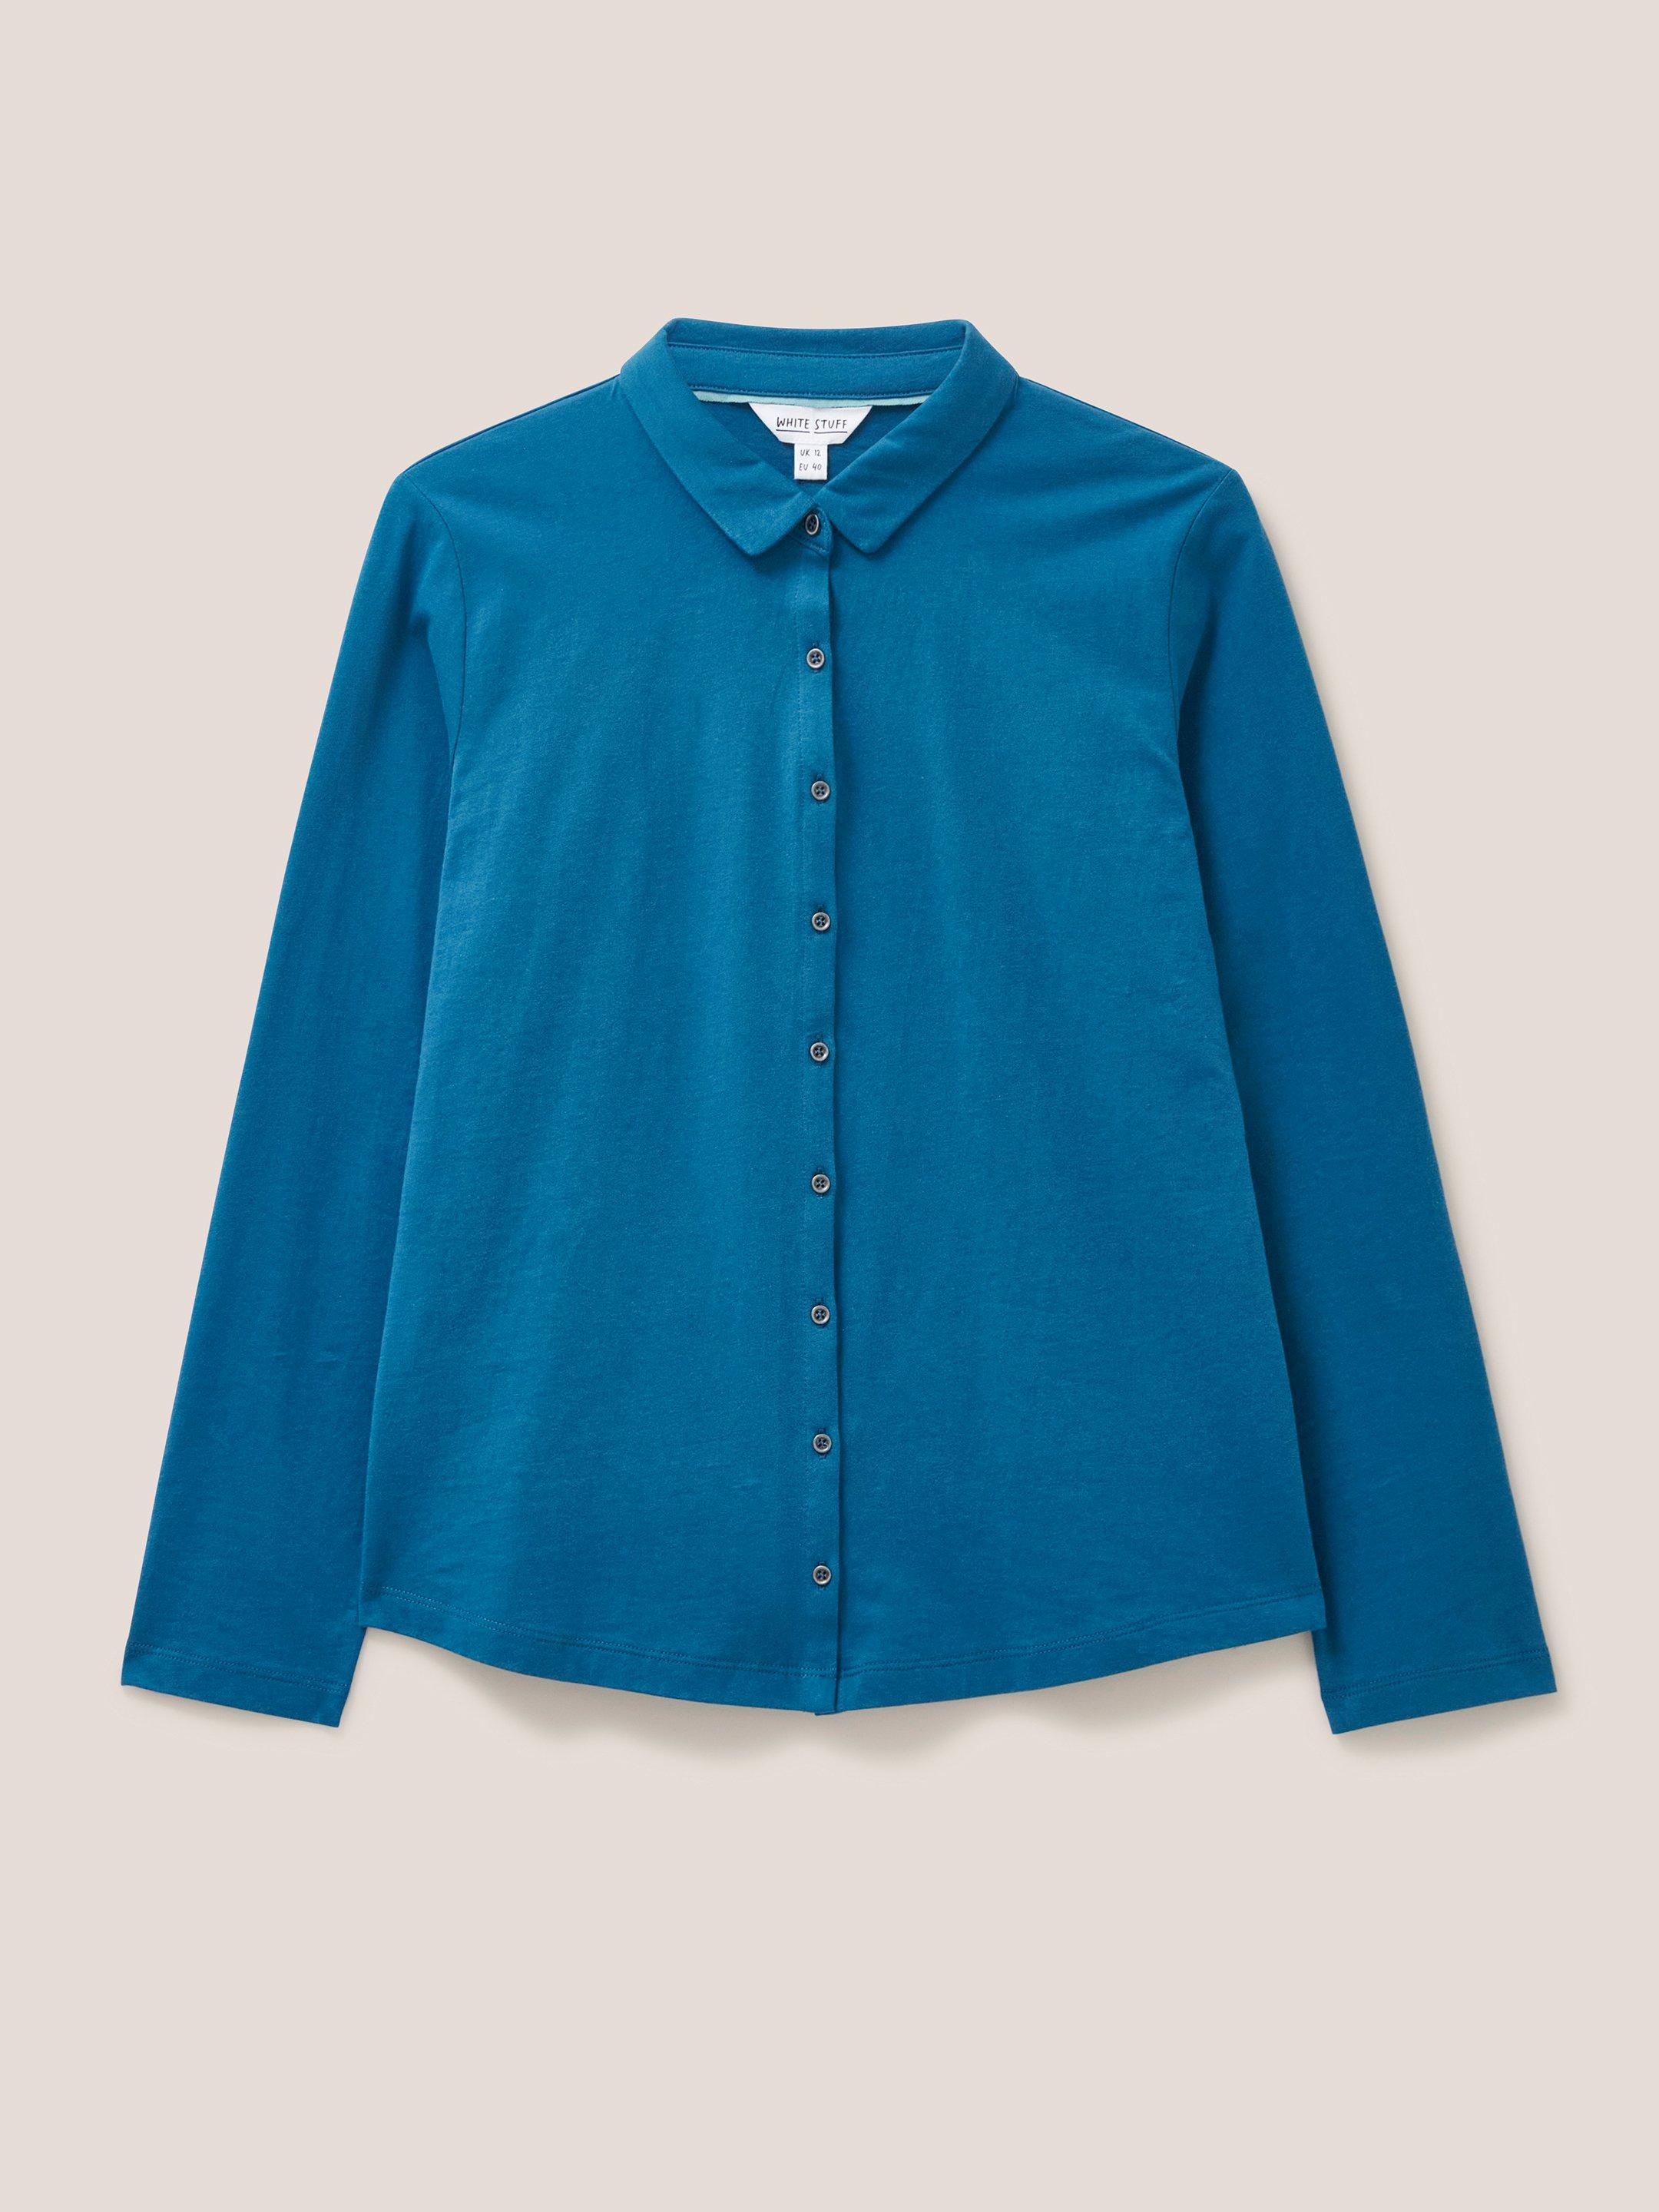 COSMIC LS SHIRT in MID BLUE - FLAT FRONT